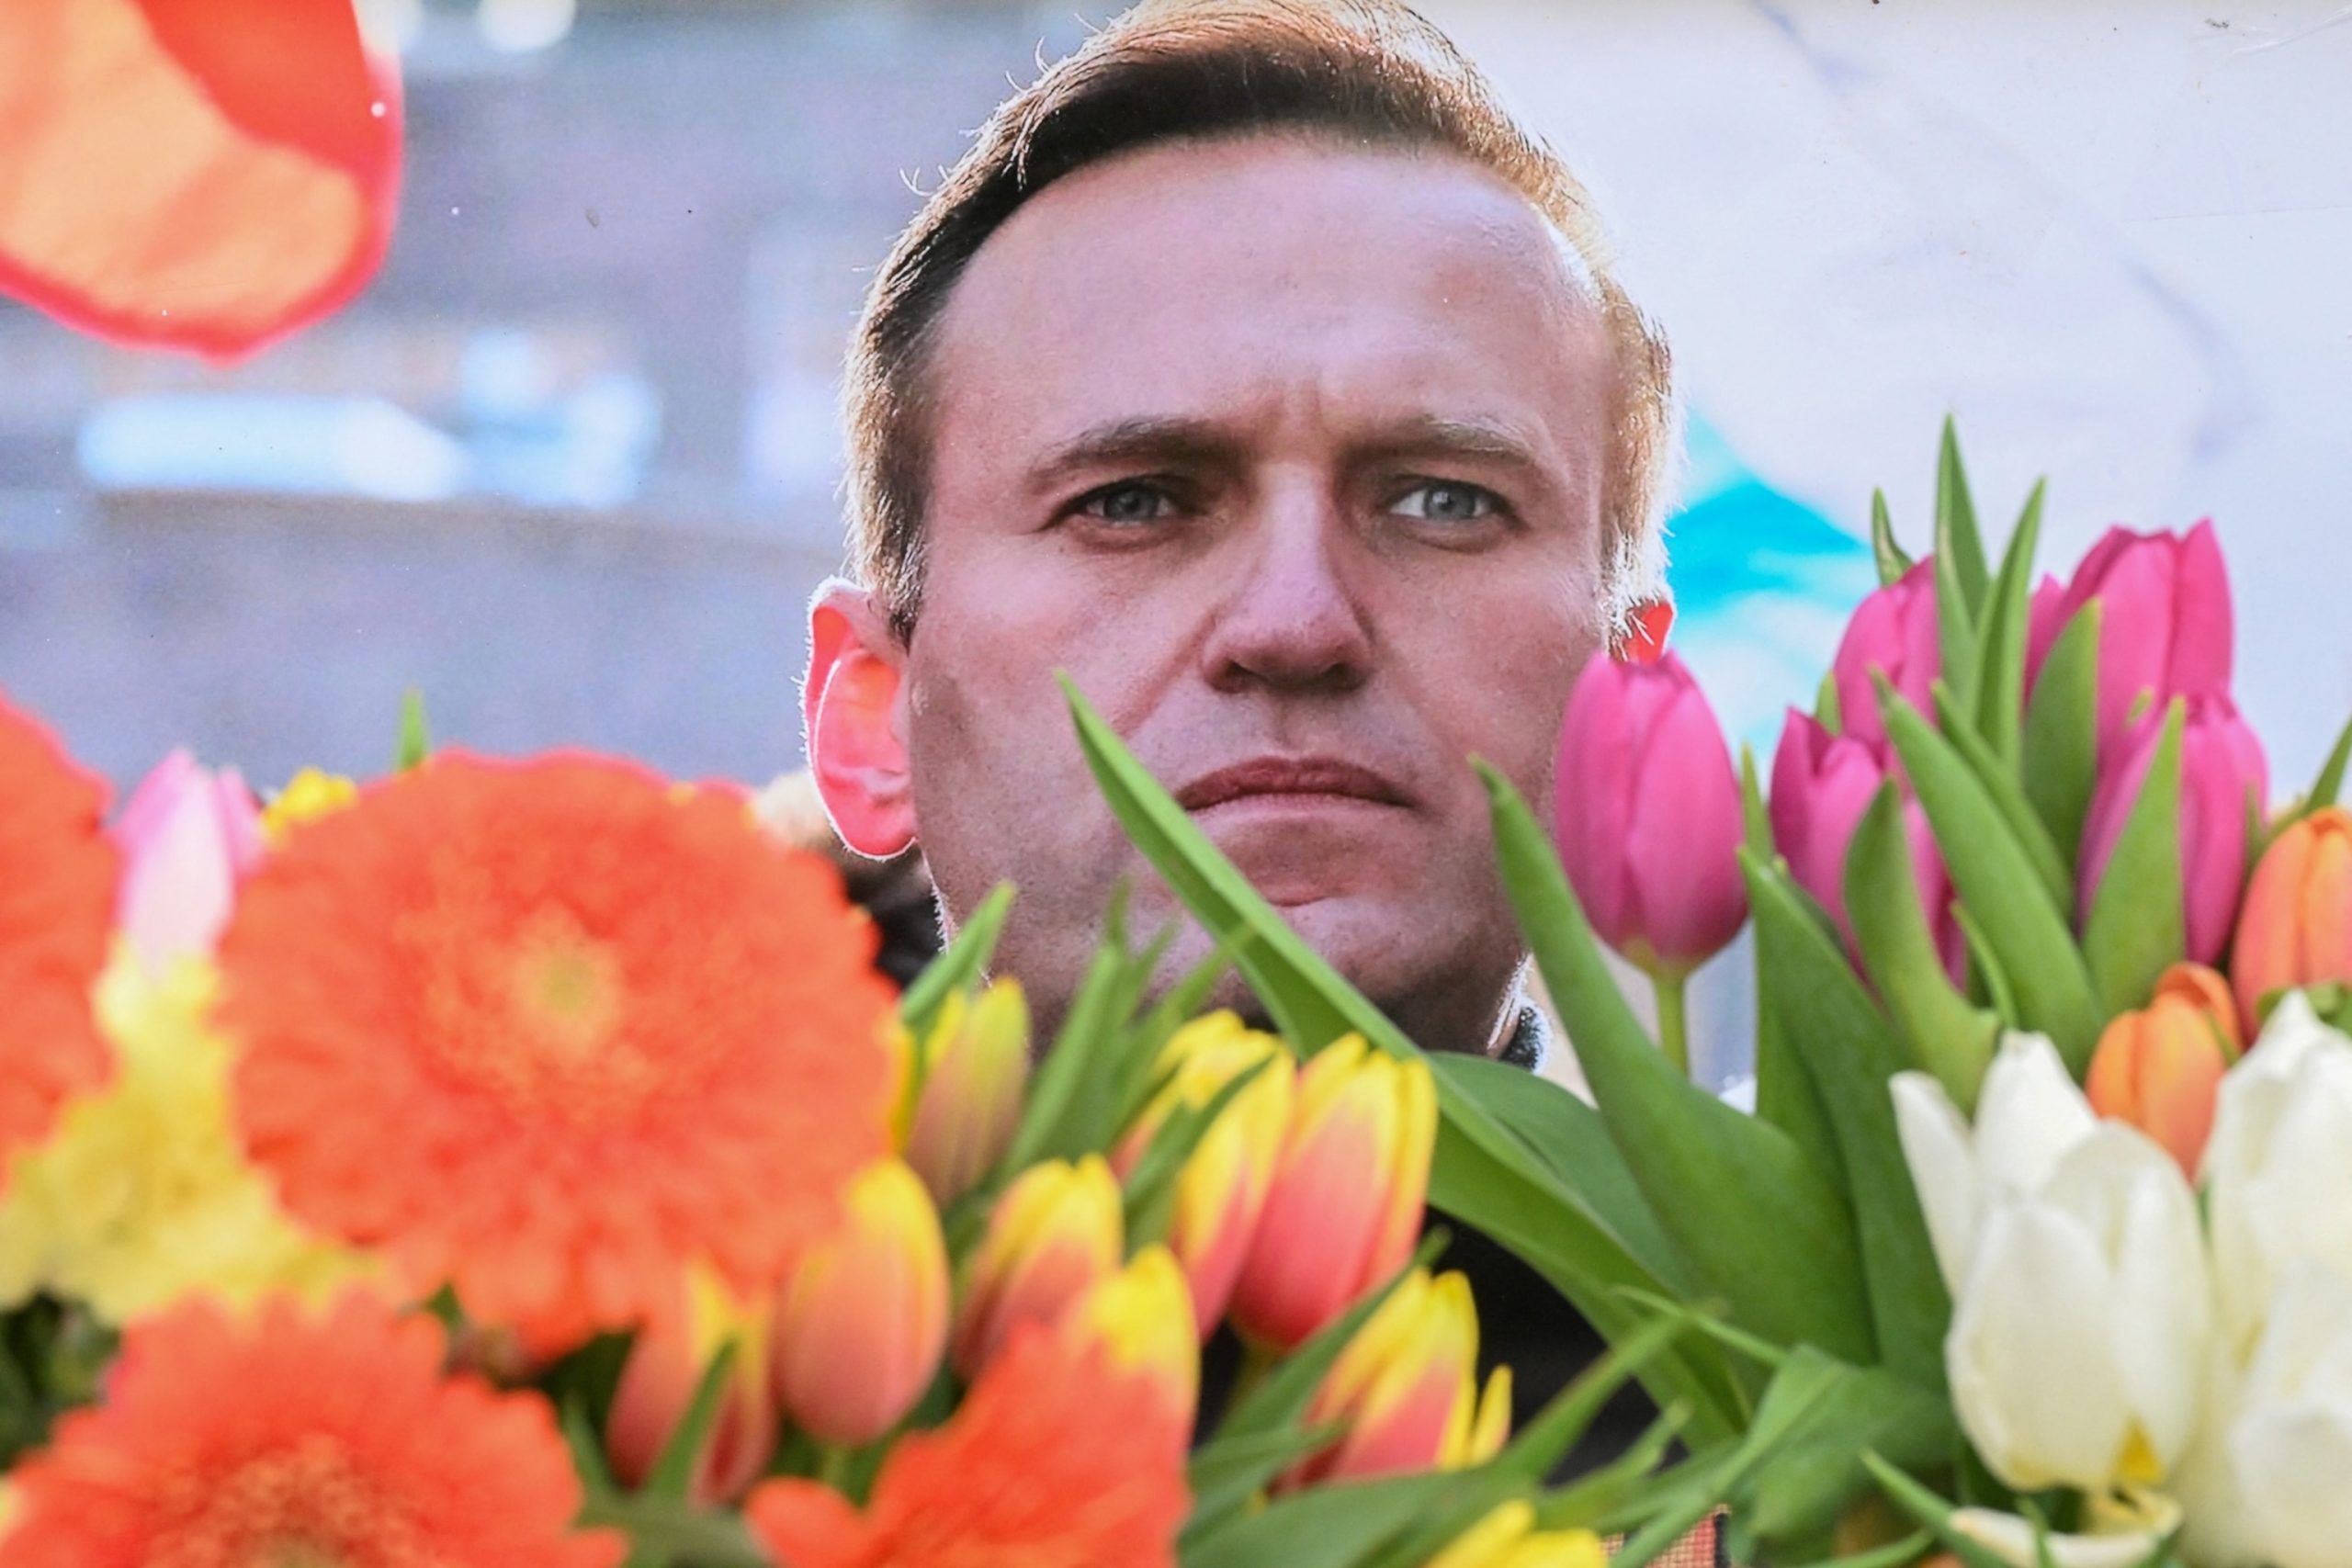 The Kremlin refuses to allow an independent postmortem on opposition leader Alexei Navalny